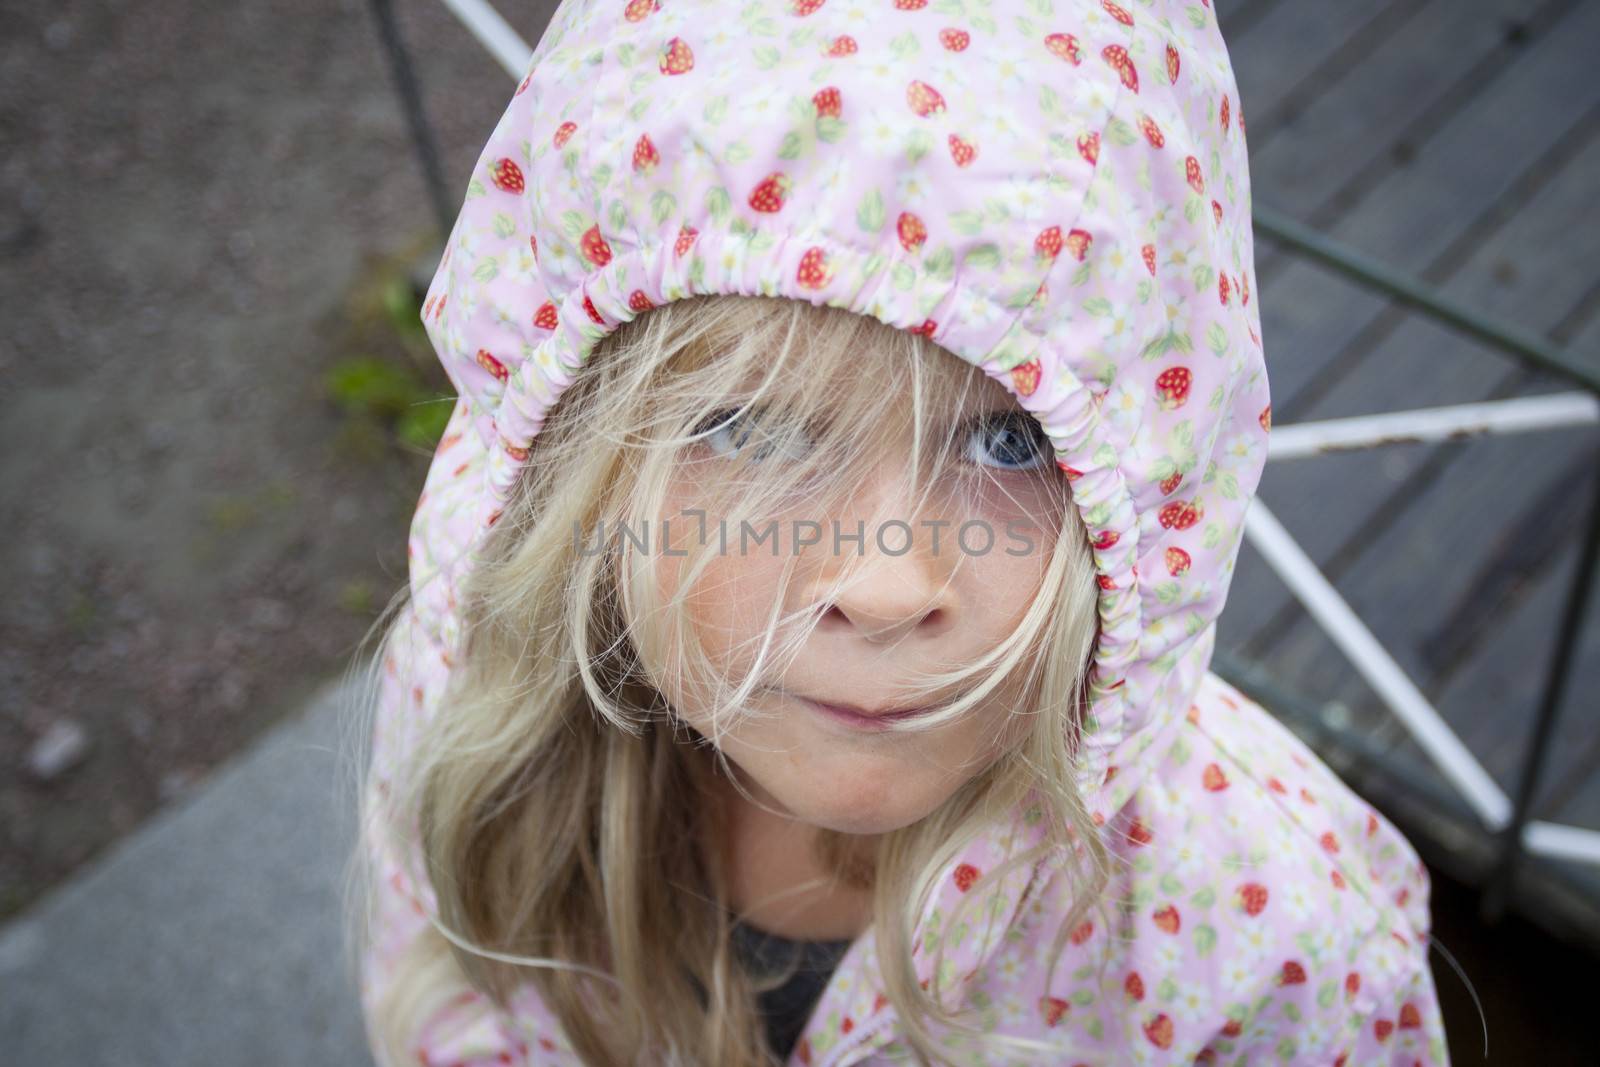 A child standing in the rain looking at camera